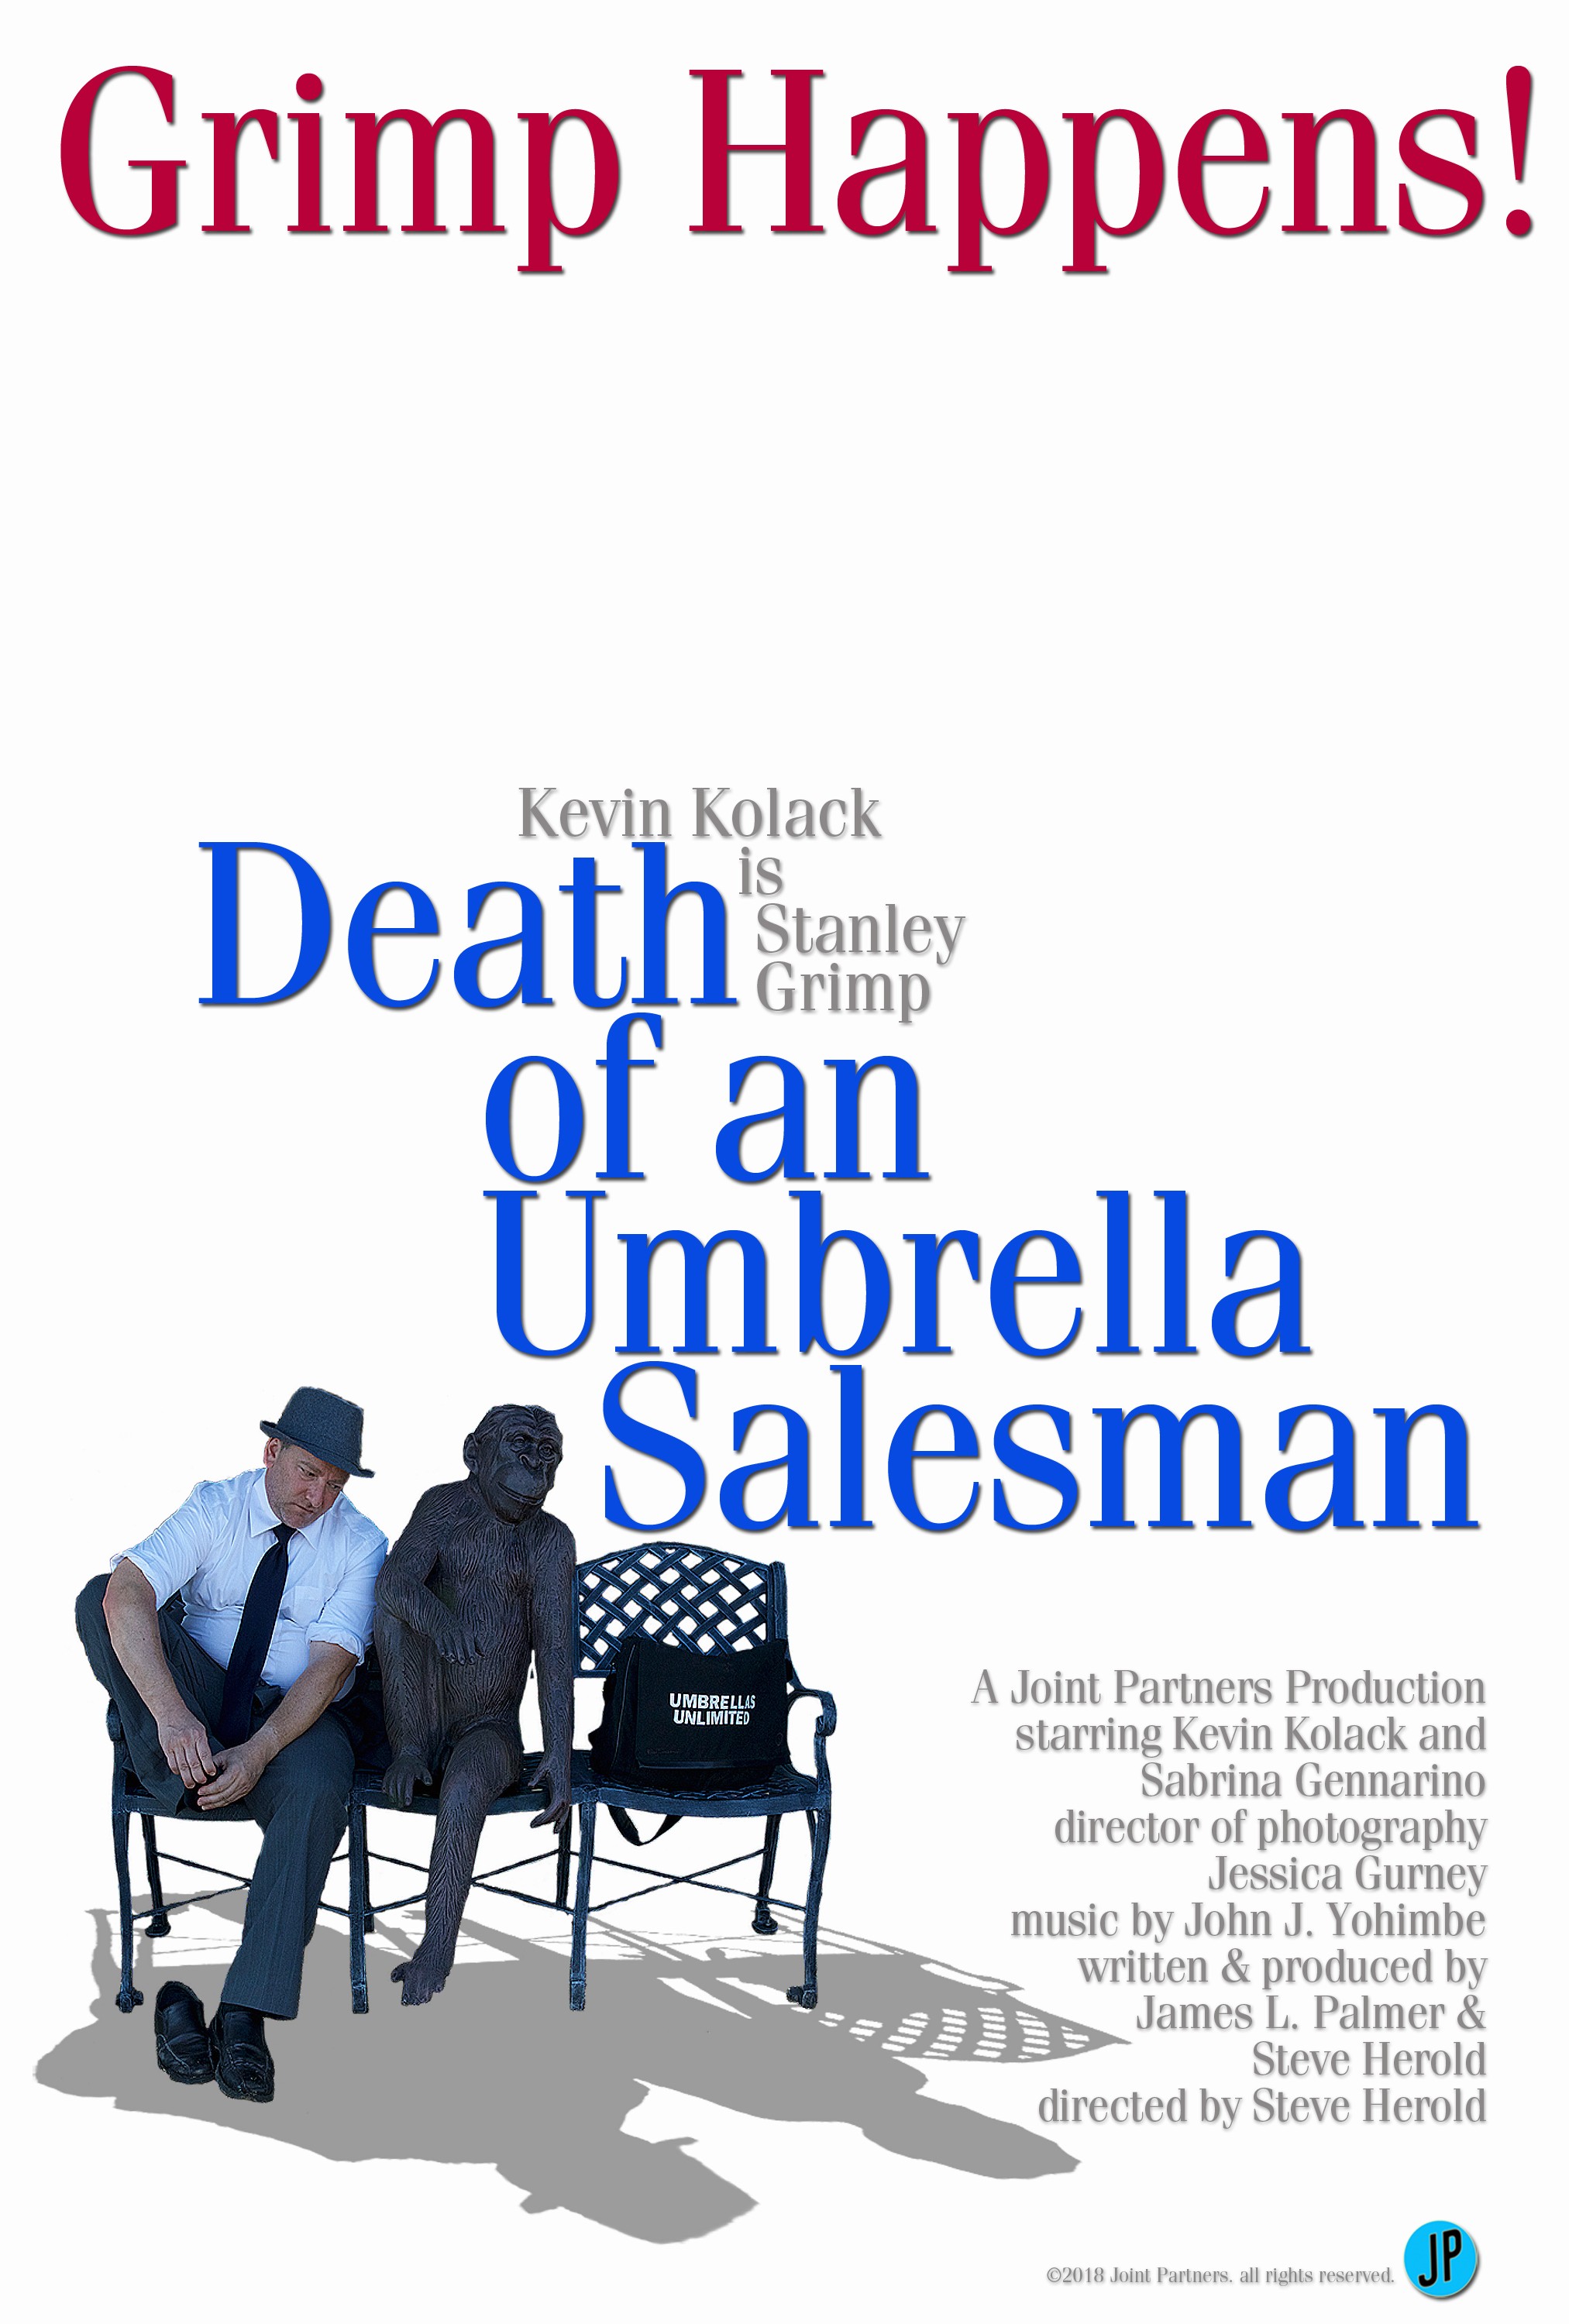 Mega Sized Movie Poster Image for Death of an Umbrella Salesman